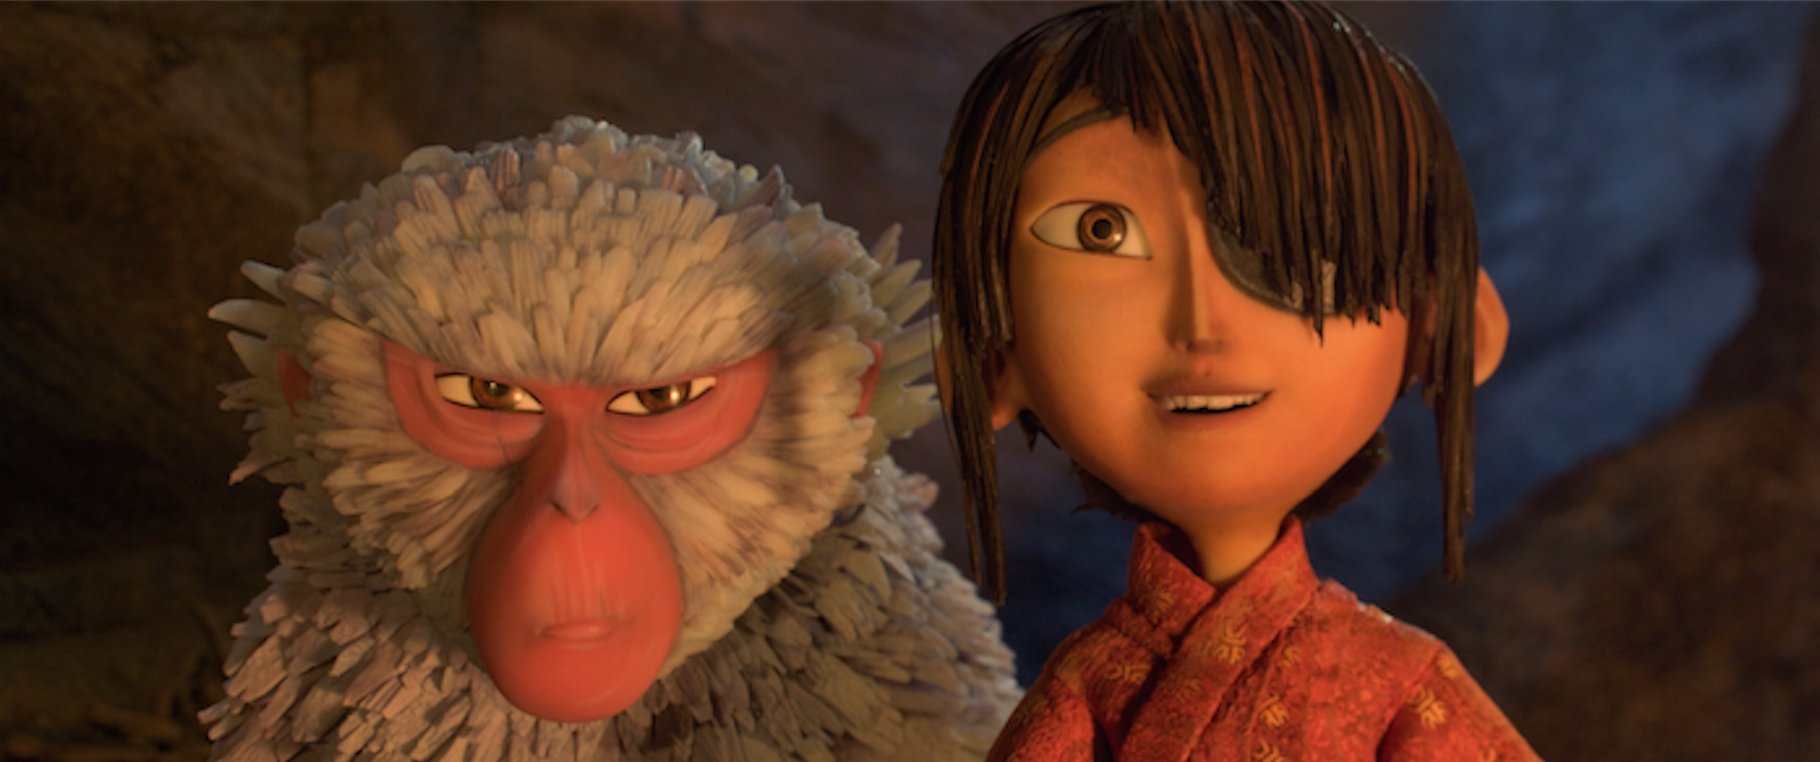 Get an inside look at KUBO and the Two Strings from Director Travis Knight. What went into making KUBO and why it was personal. #KUBOMovie